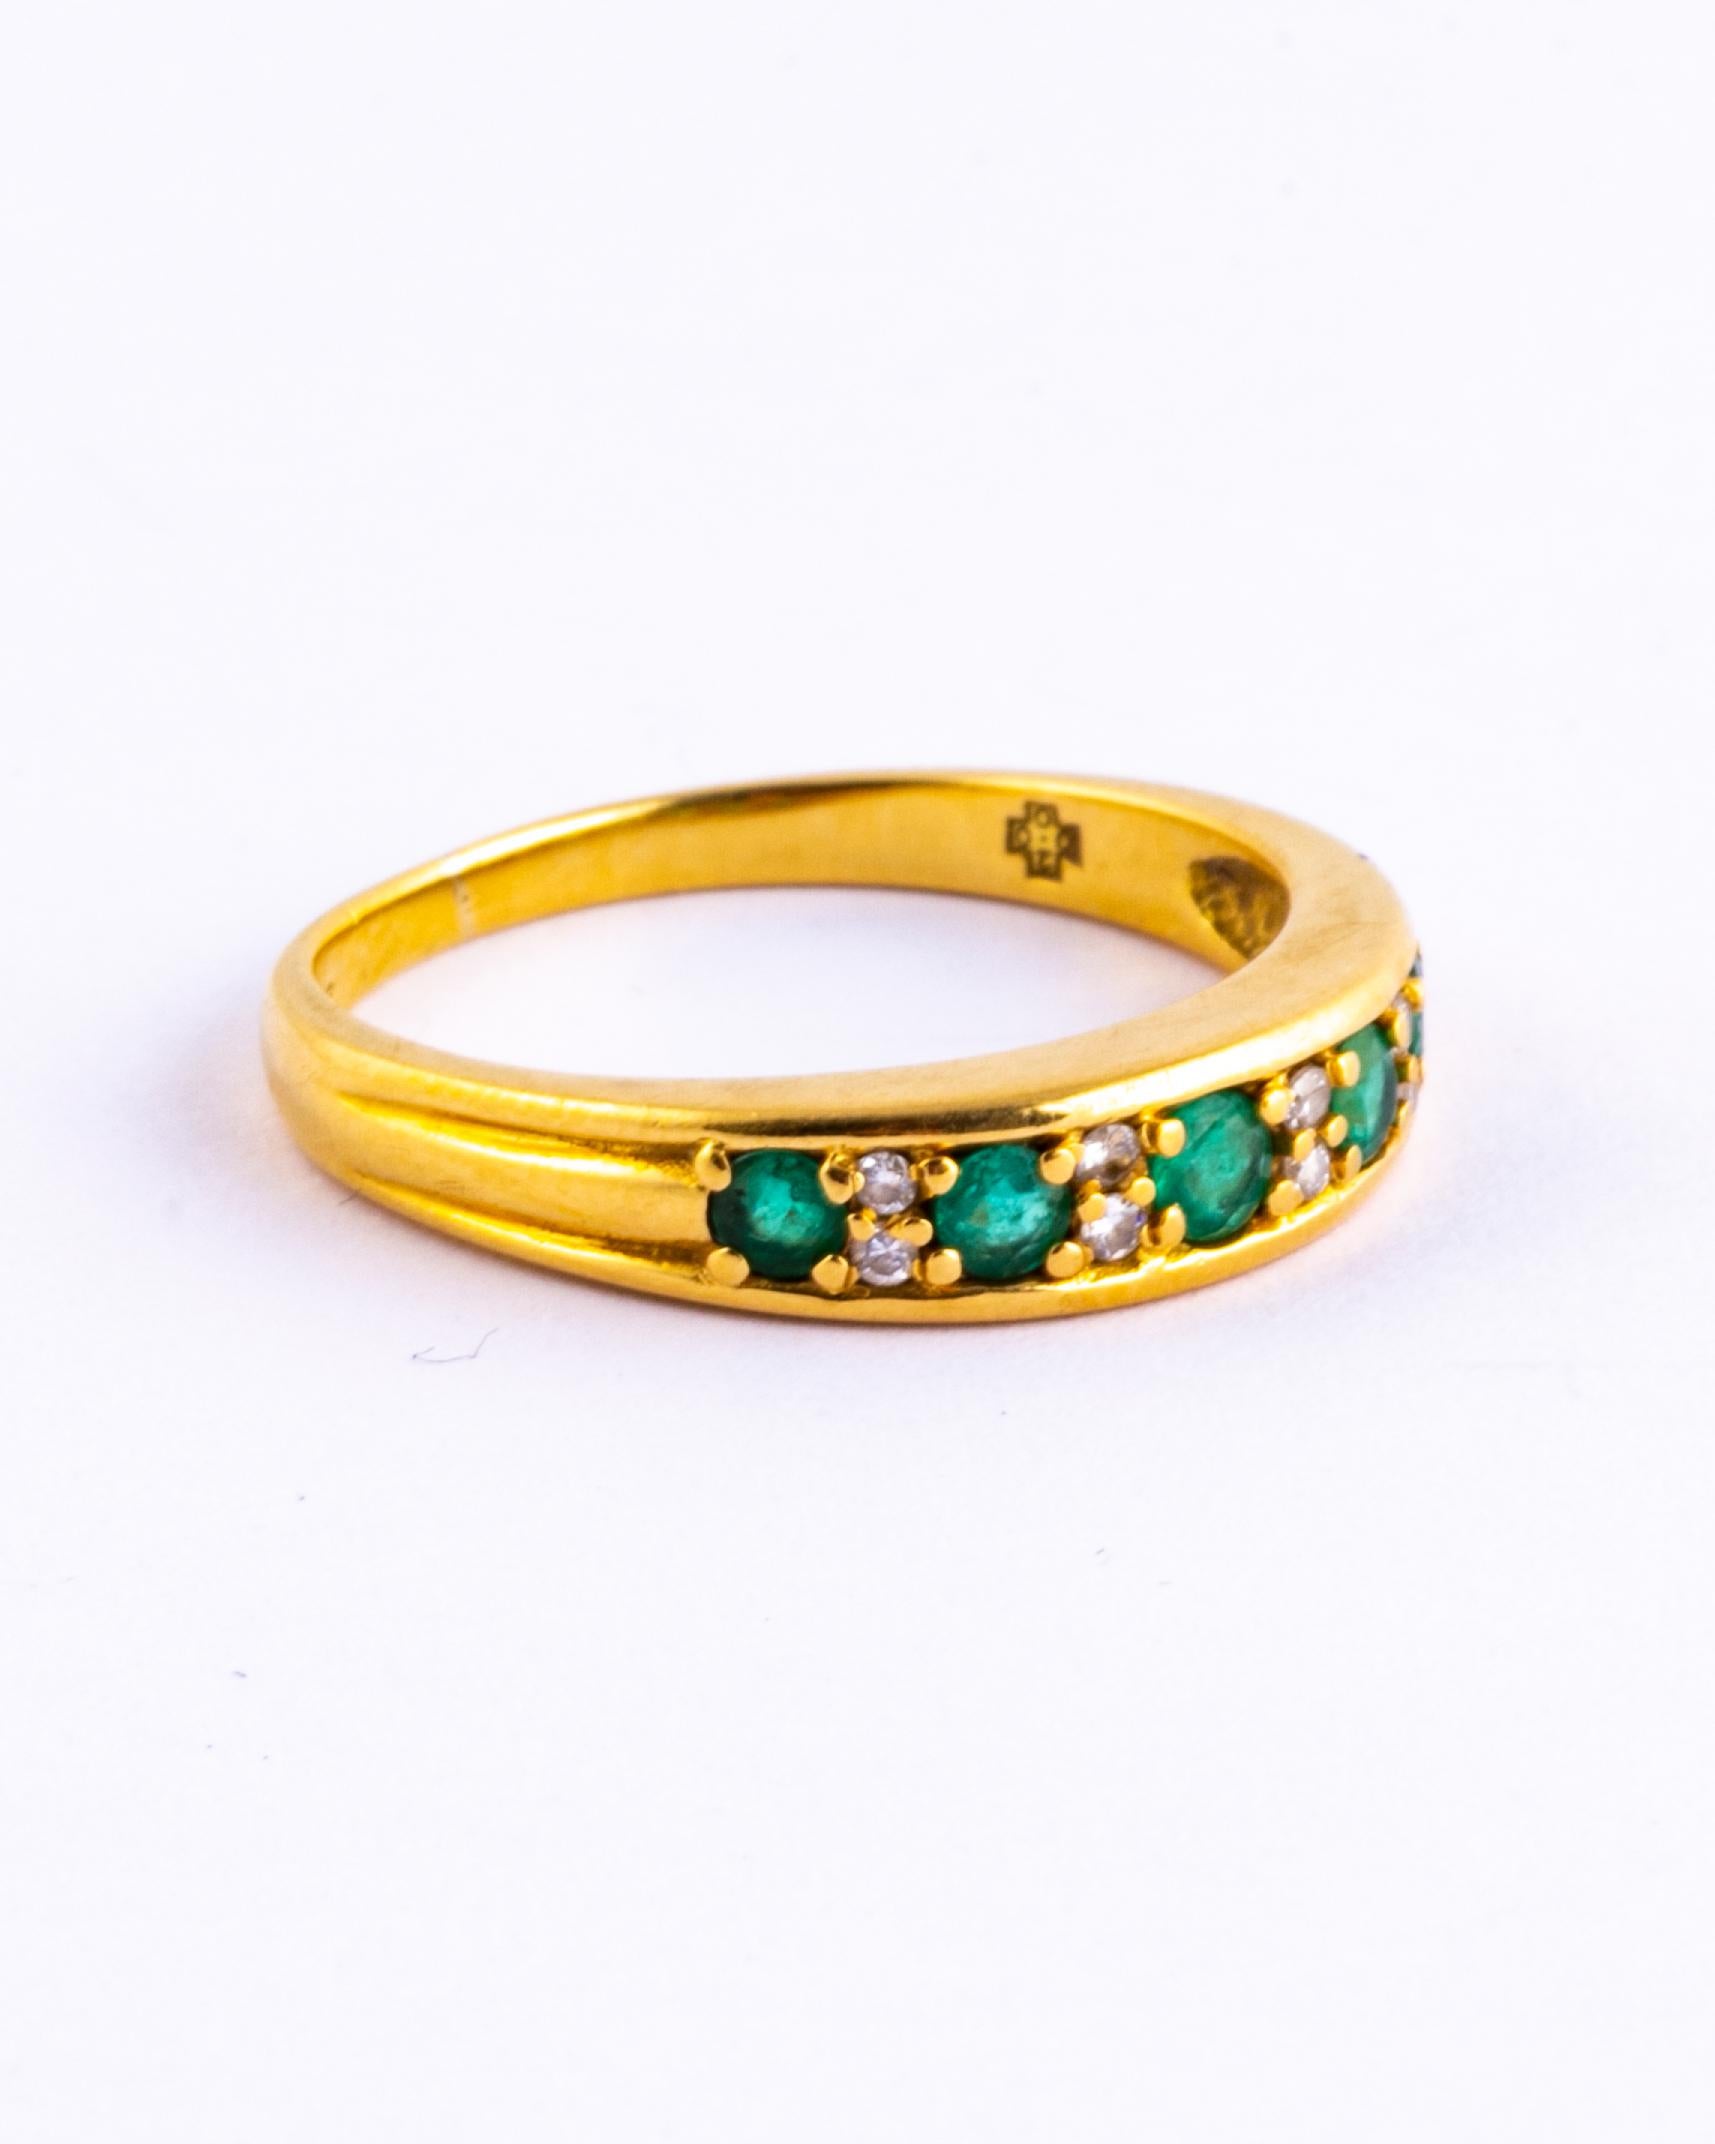 The emeralds in this ring are beautiful and bright and measure 10pts each. In between the gorgeous green stones are pairs of diamonds which measure 2pts each. The ring is modelled in 18carat gold.

Ring Size: Q 1/2 or 8 1/2 
Band Width: 4mm

Weight: